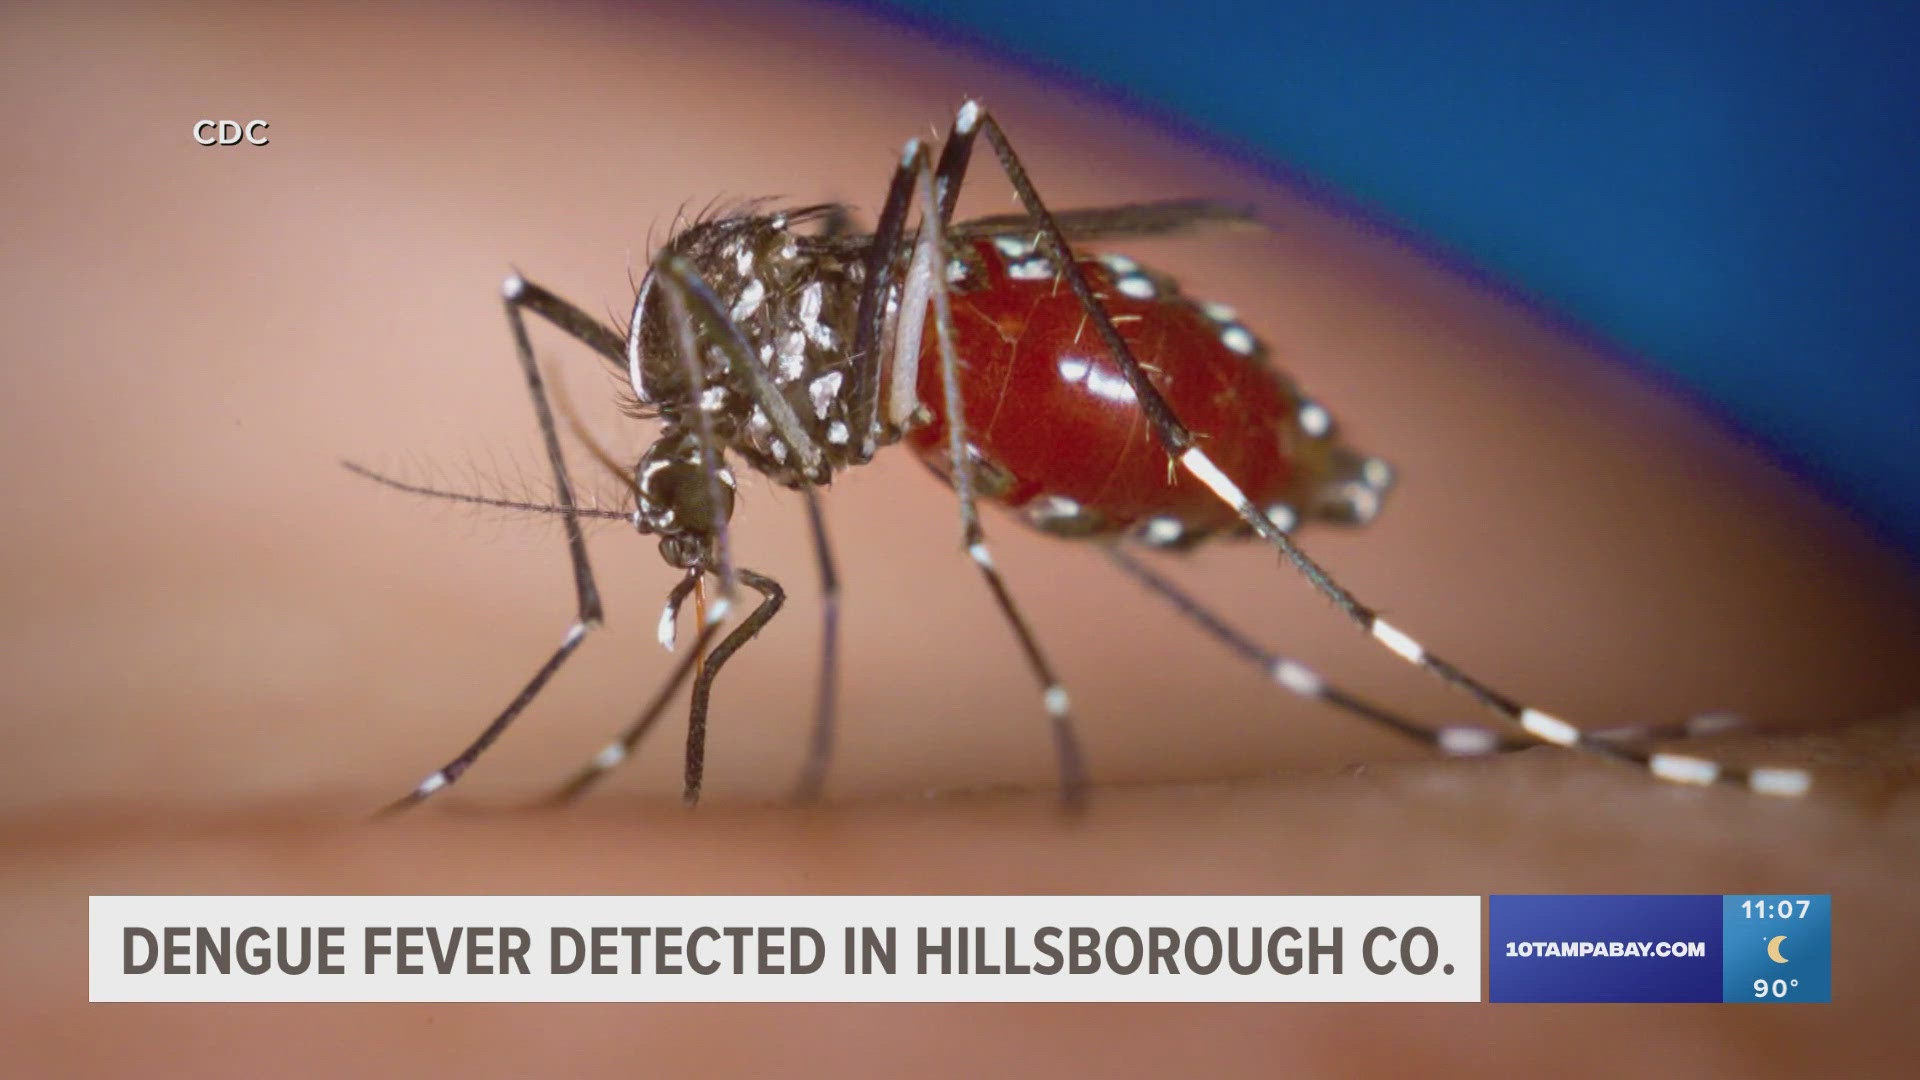 At this time, DOH-Hillsborough and Hillsborough County Mosquito Control are conducting aerial spraying to help prevent the spread of the viral infection.